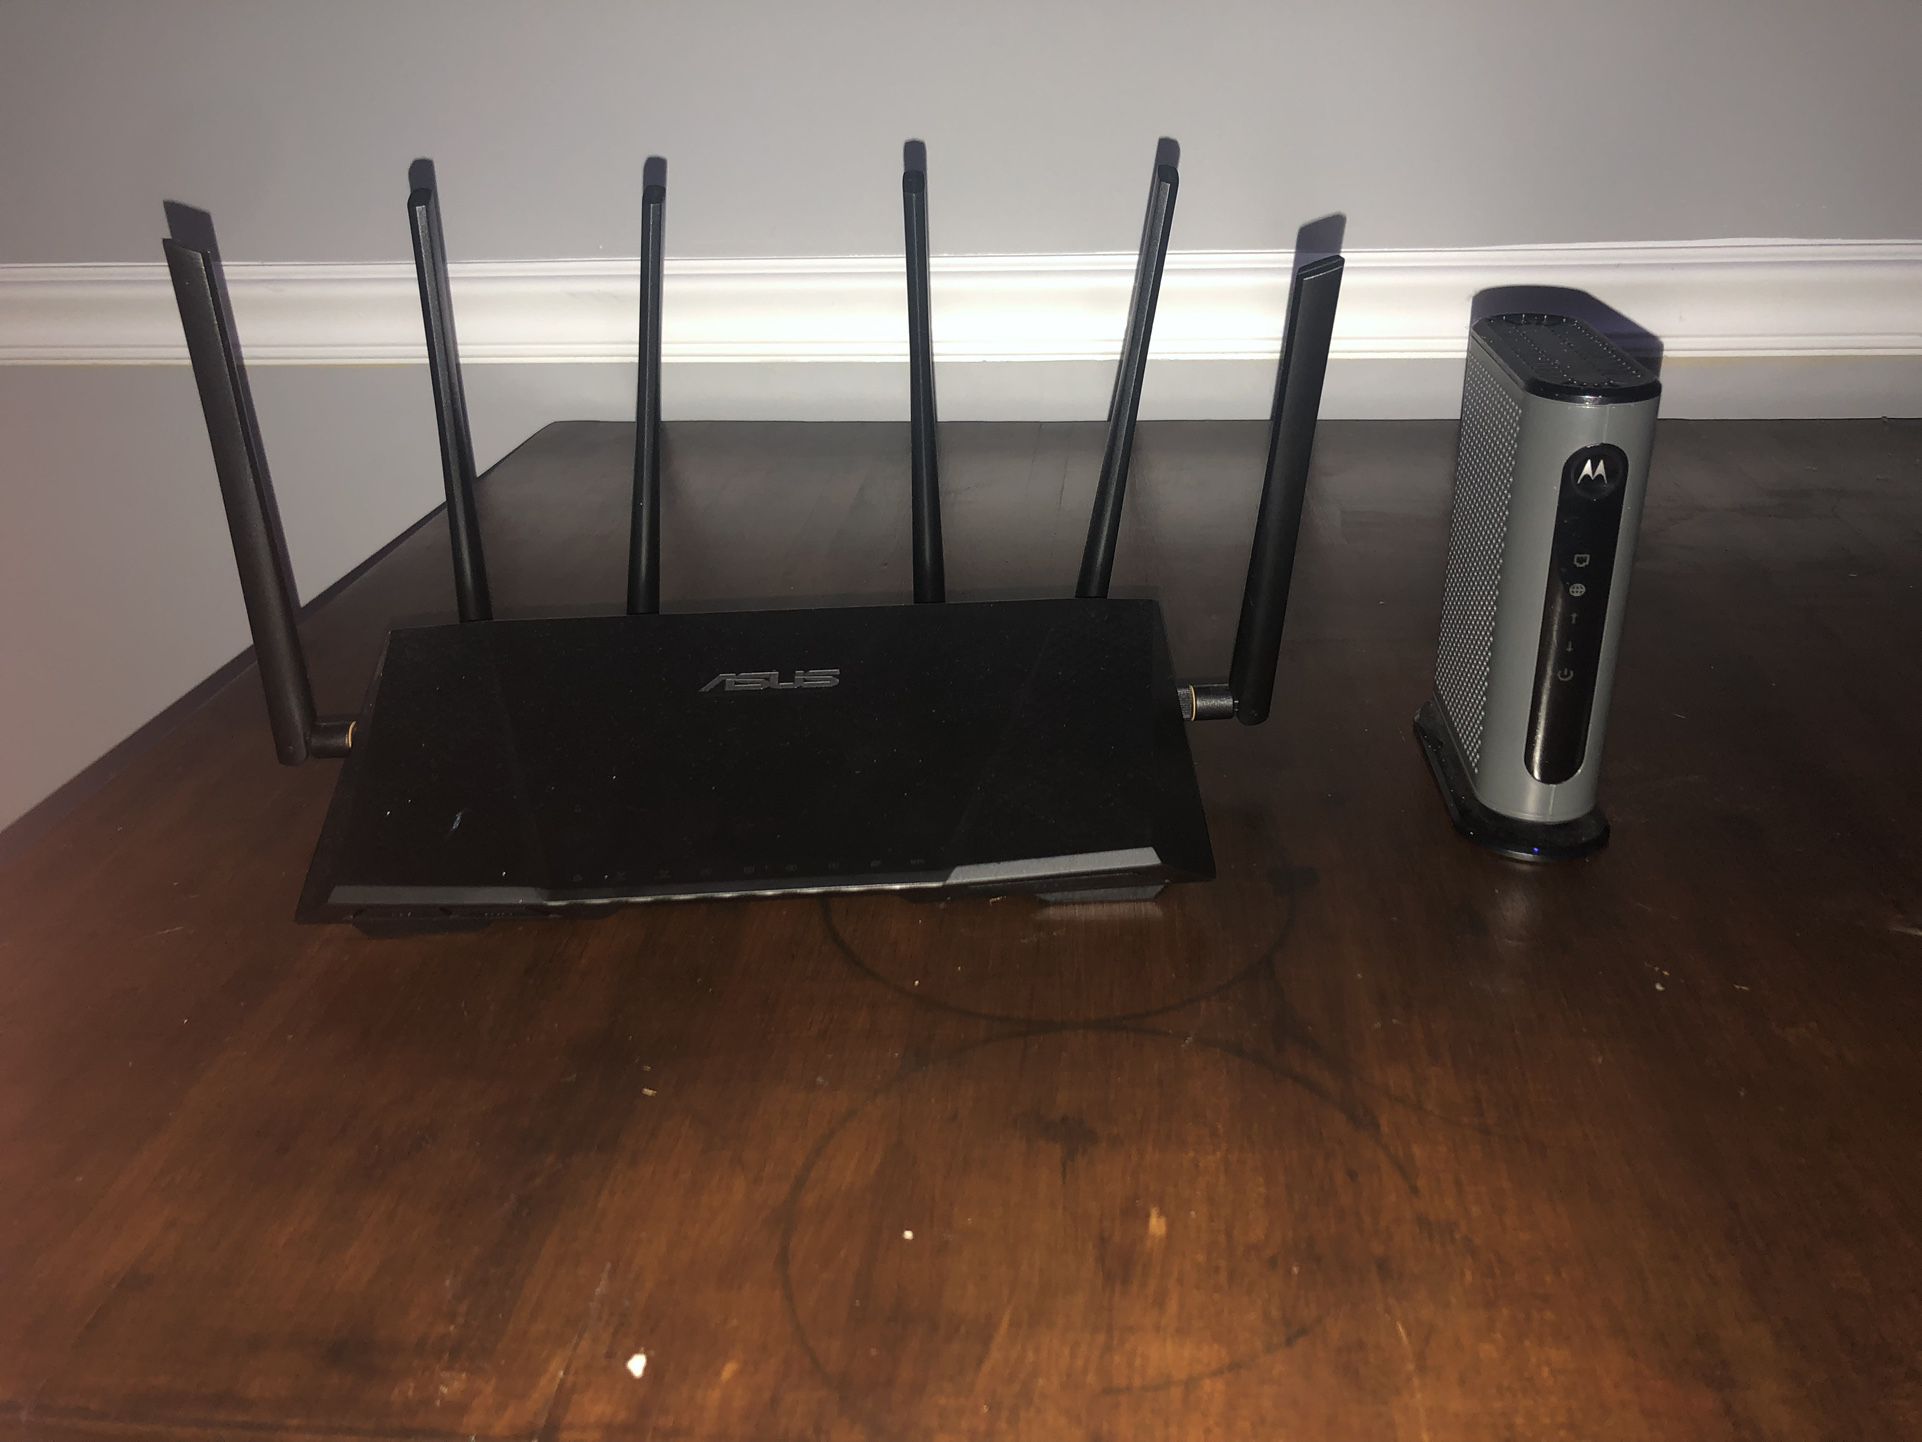 asus ac 3200 tri-band gigabit router and modem